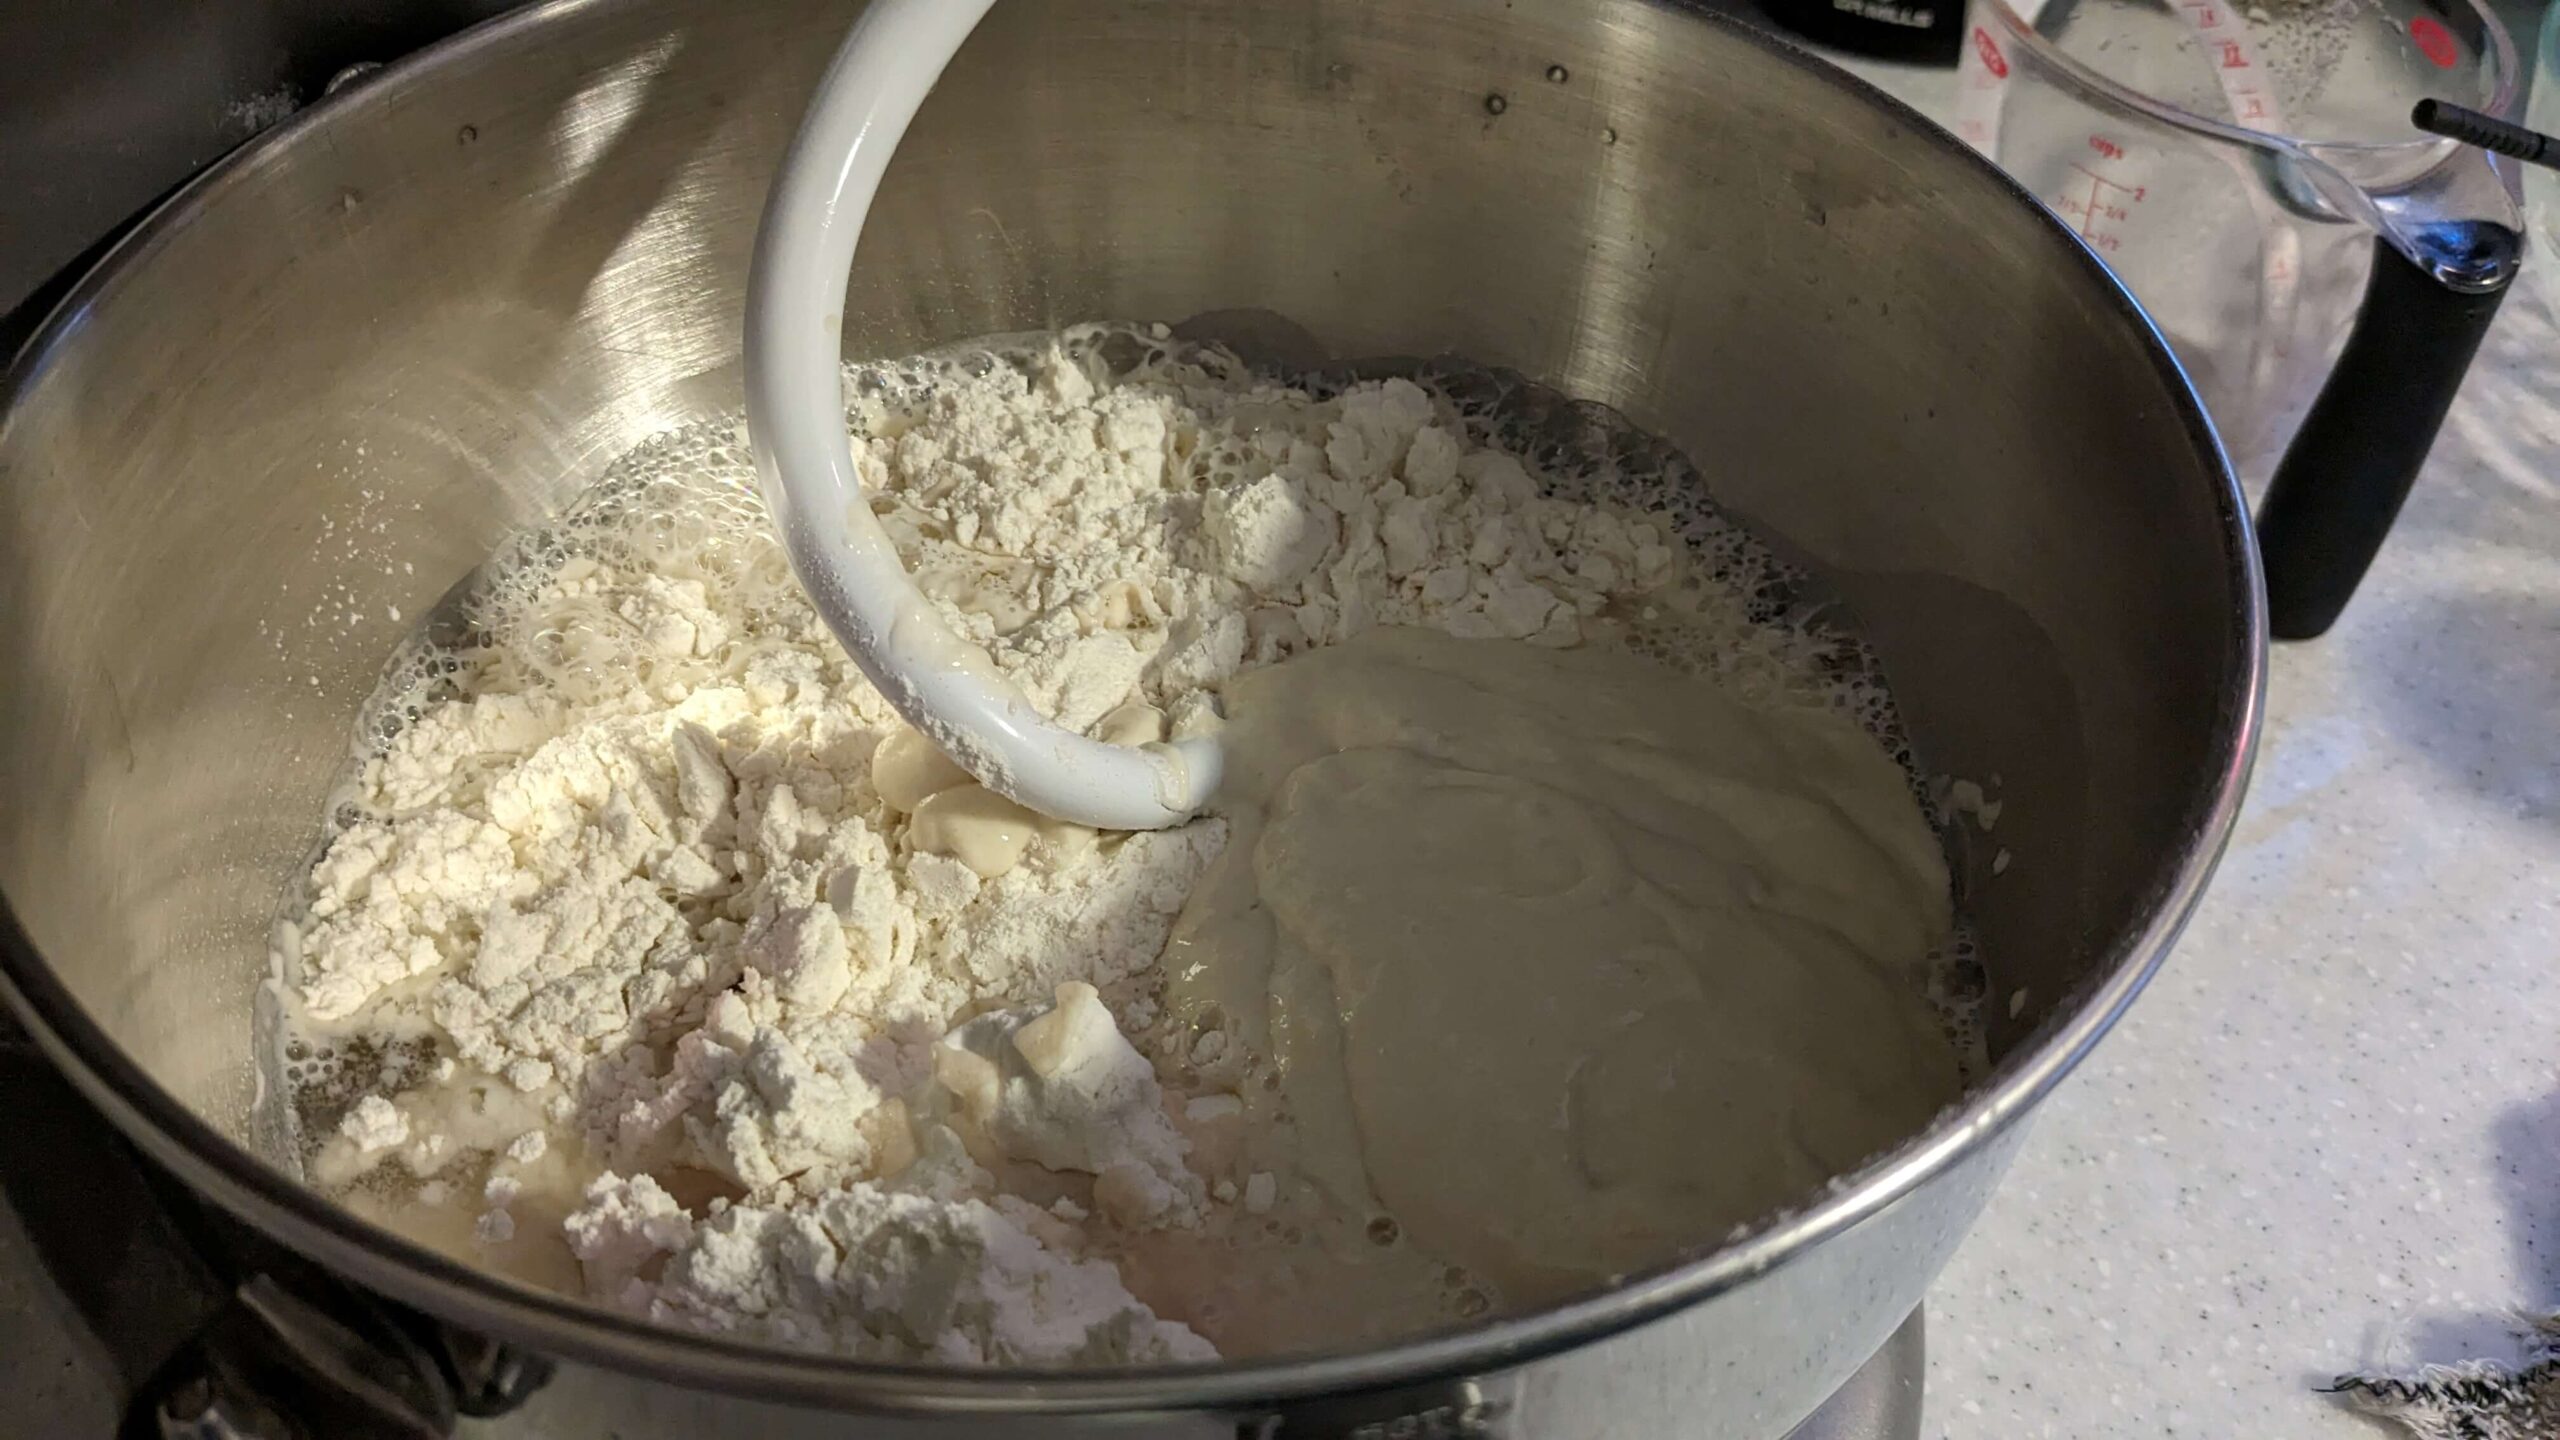 sourdough starter in a wet dough mixture in the bowl of a kitchen aid mixer with a dough hook